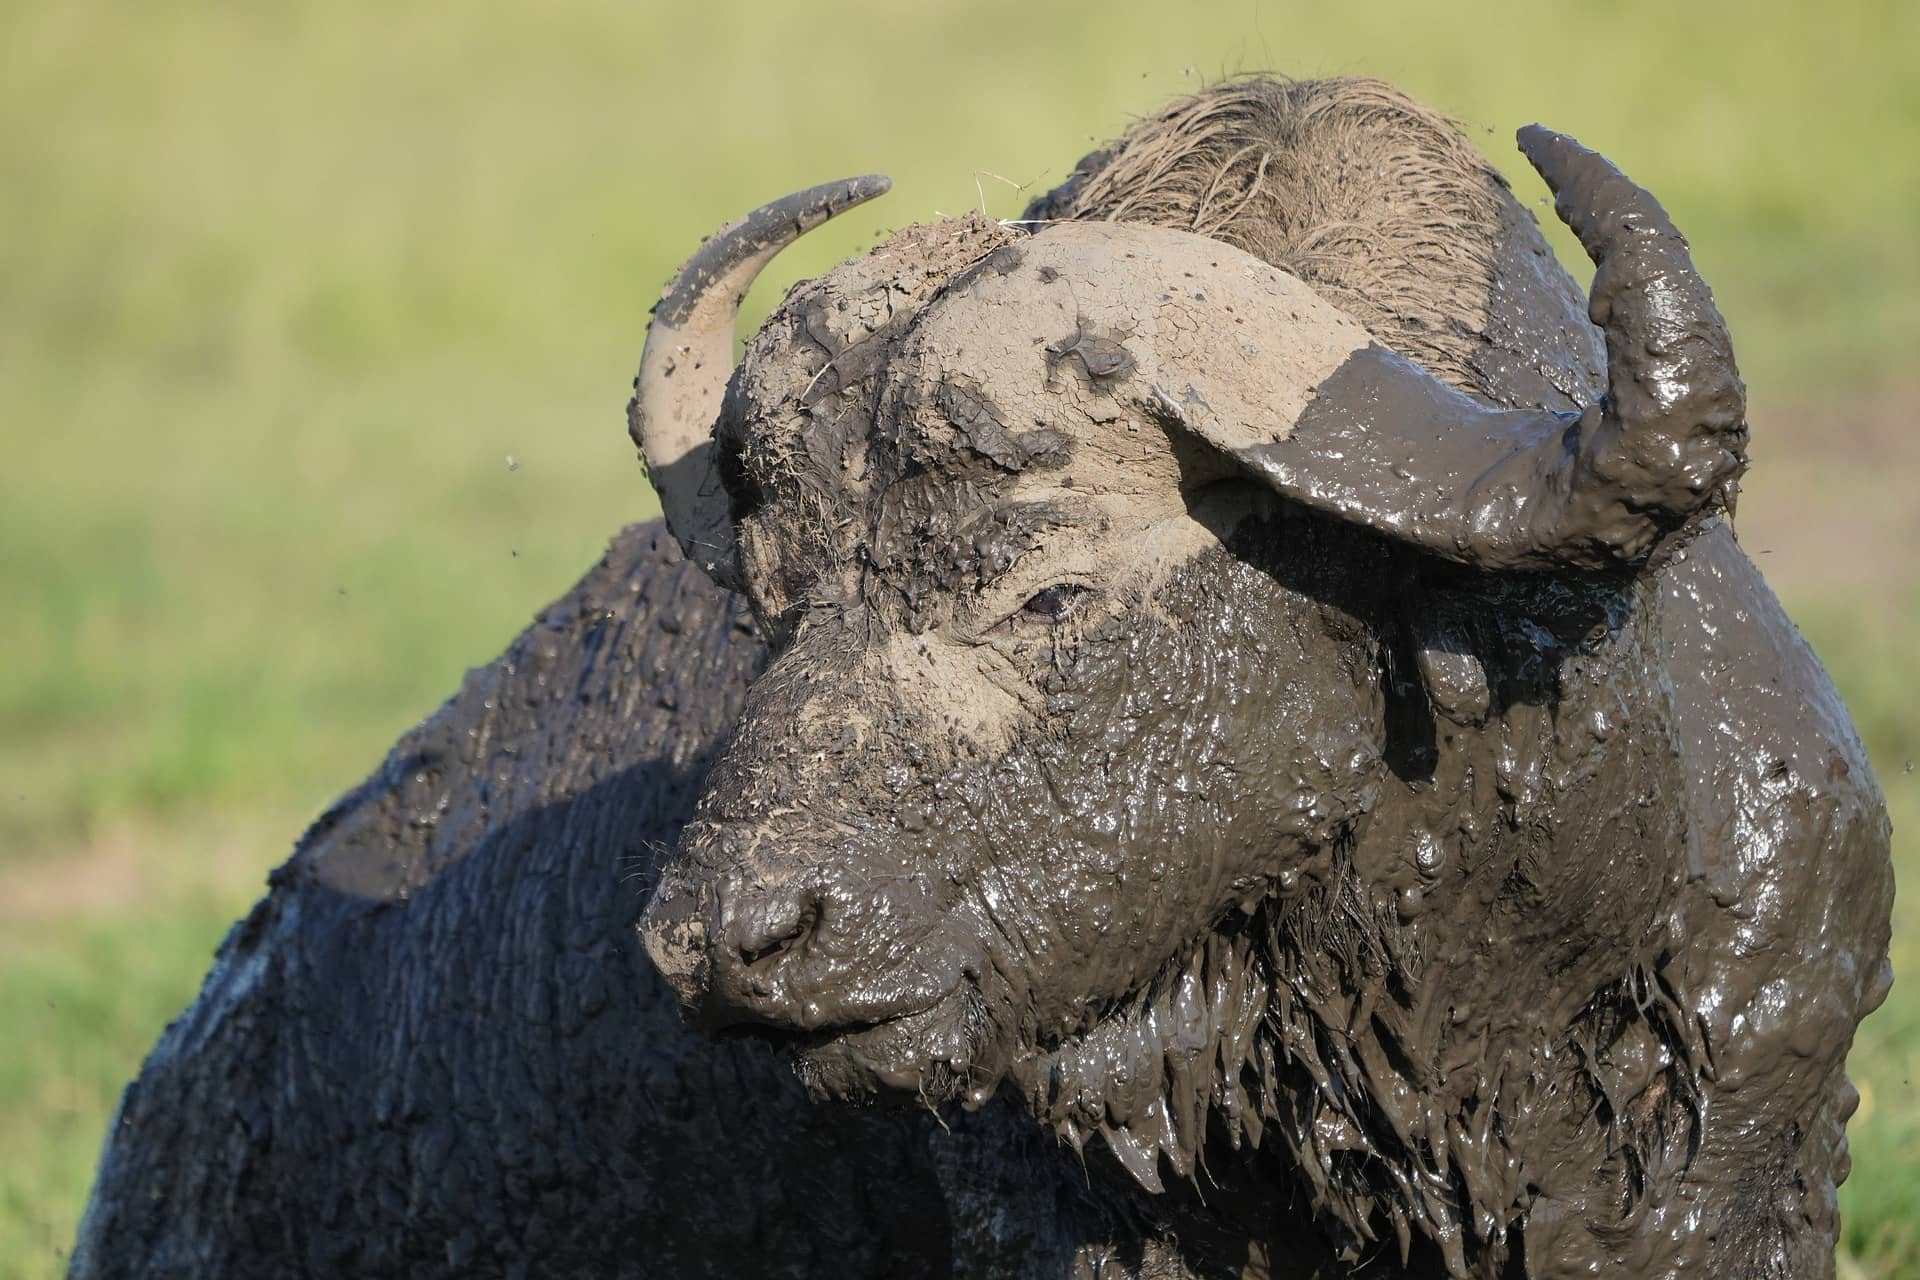 Want to know some fascinating African buffalo facts and see photos?